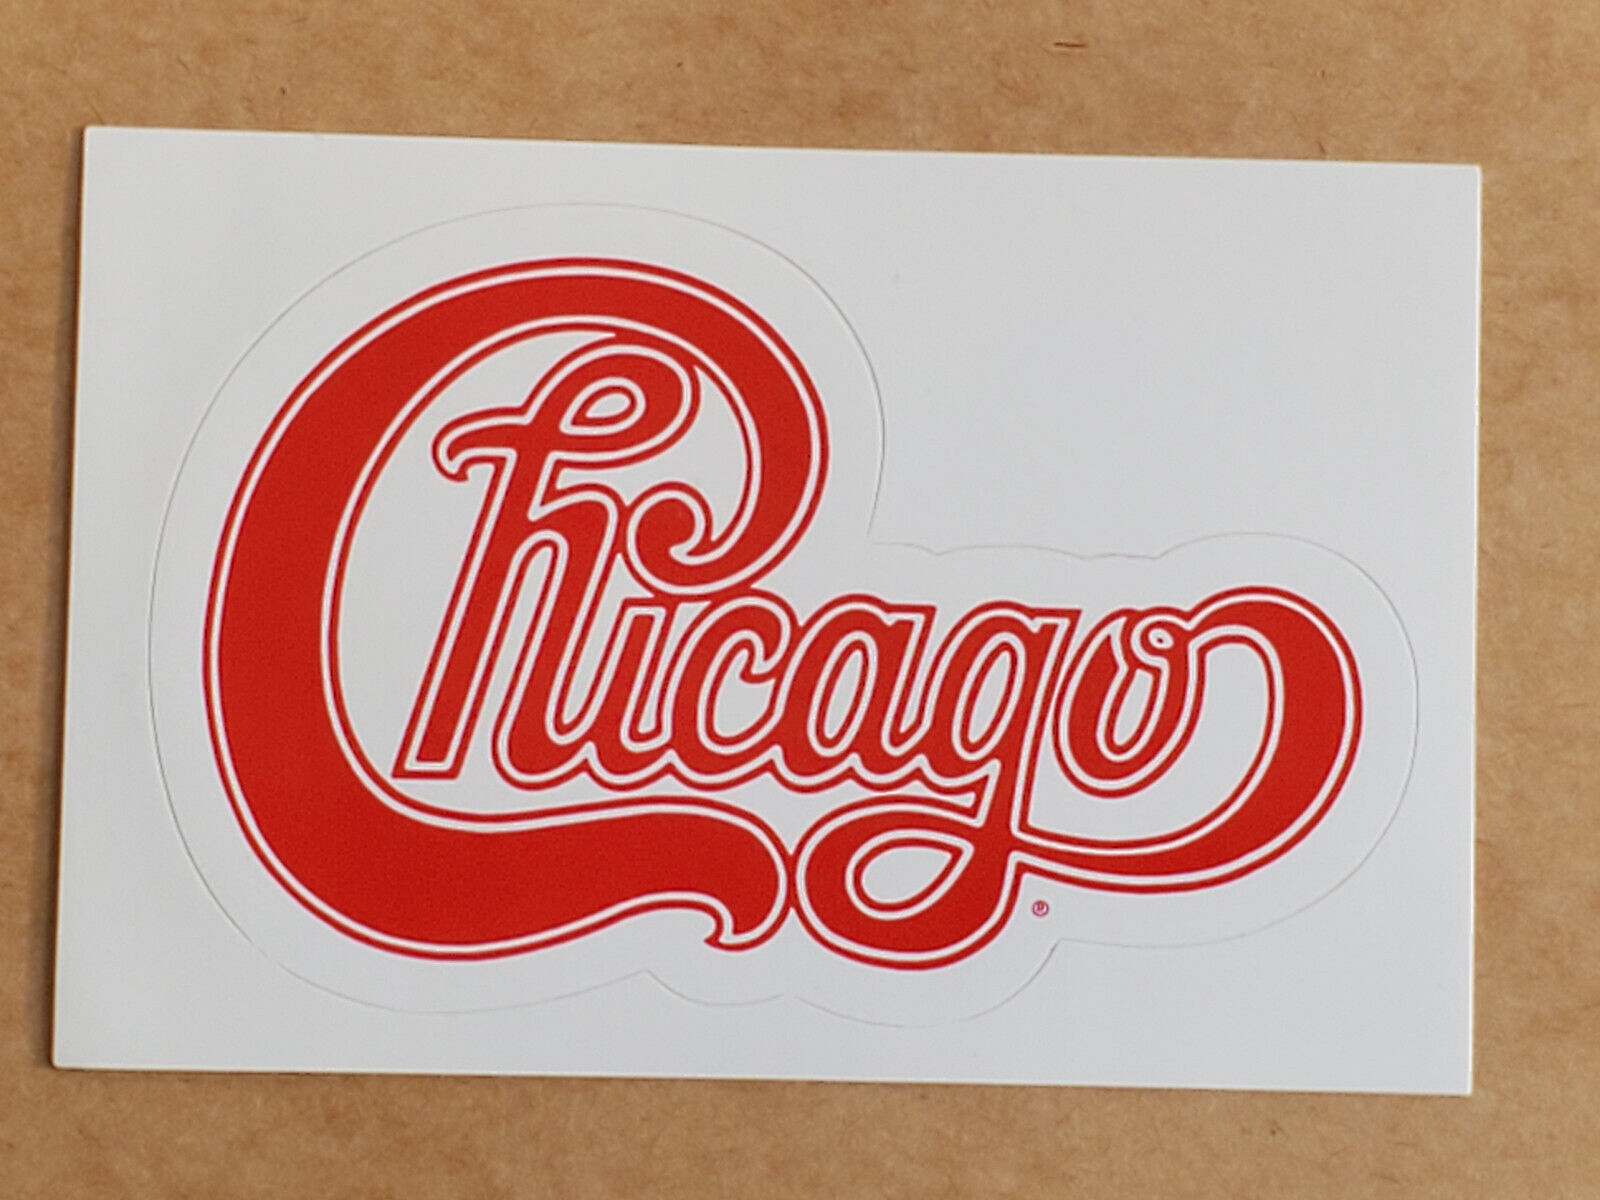 CHICAGO ROCK BAND STICKERS 2002 PROMO PROMOTIONAL PETER CETERA